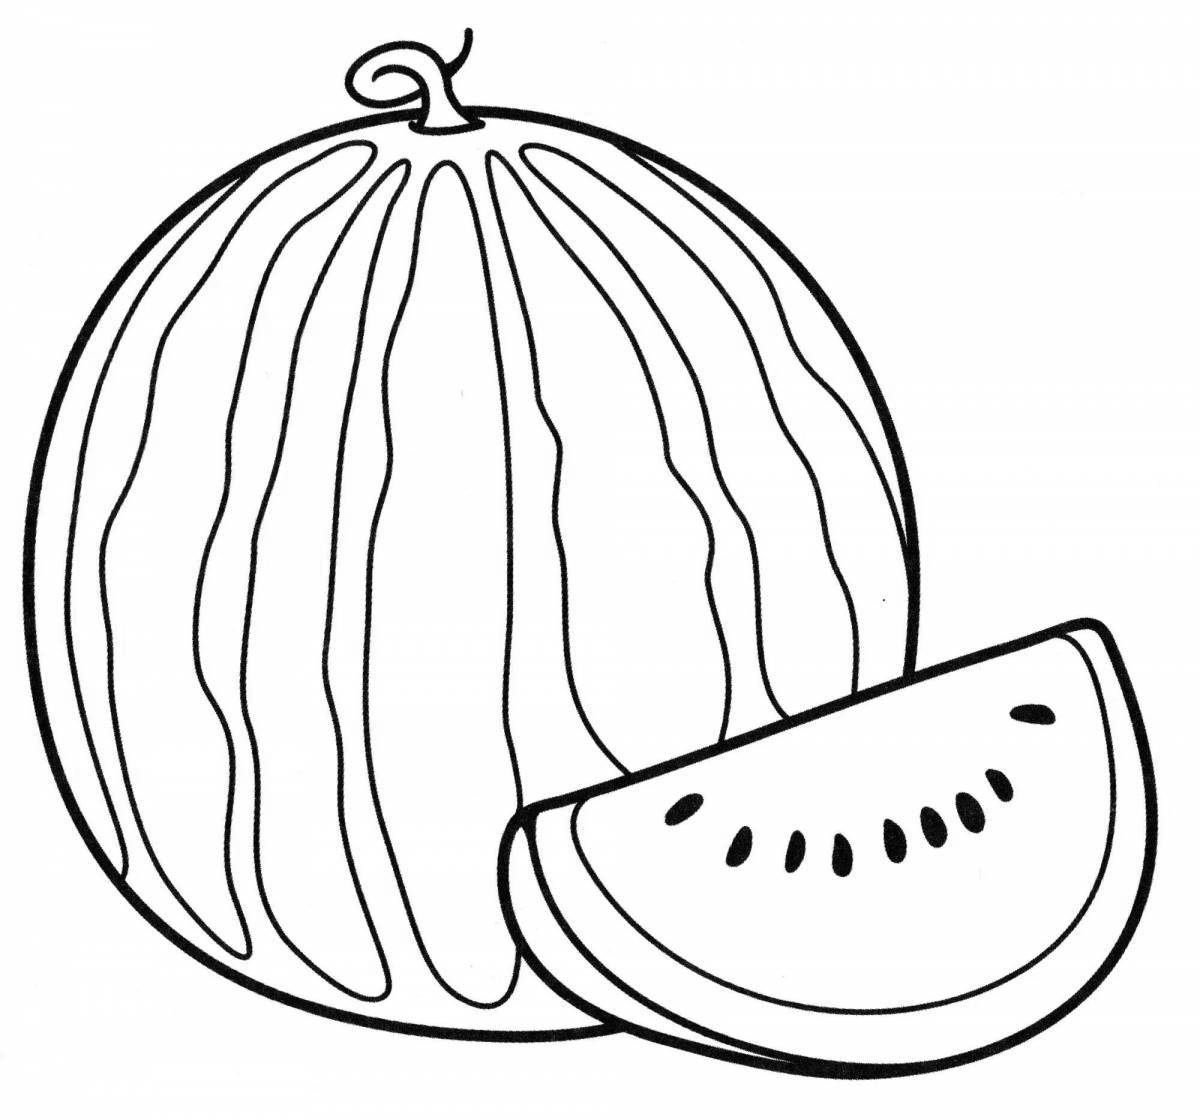 Drawing of a shining watermelon